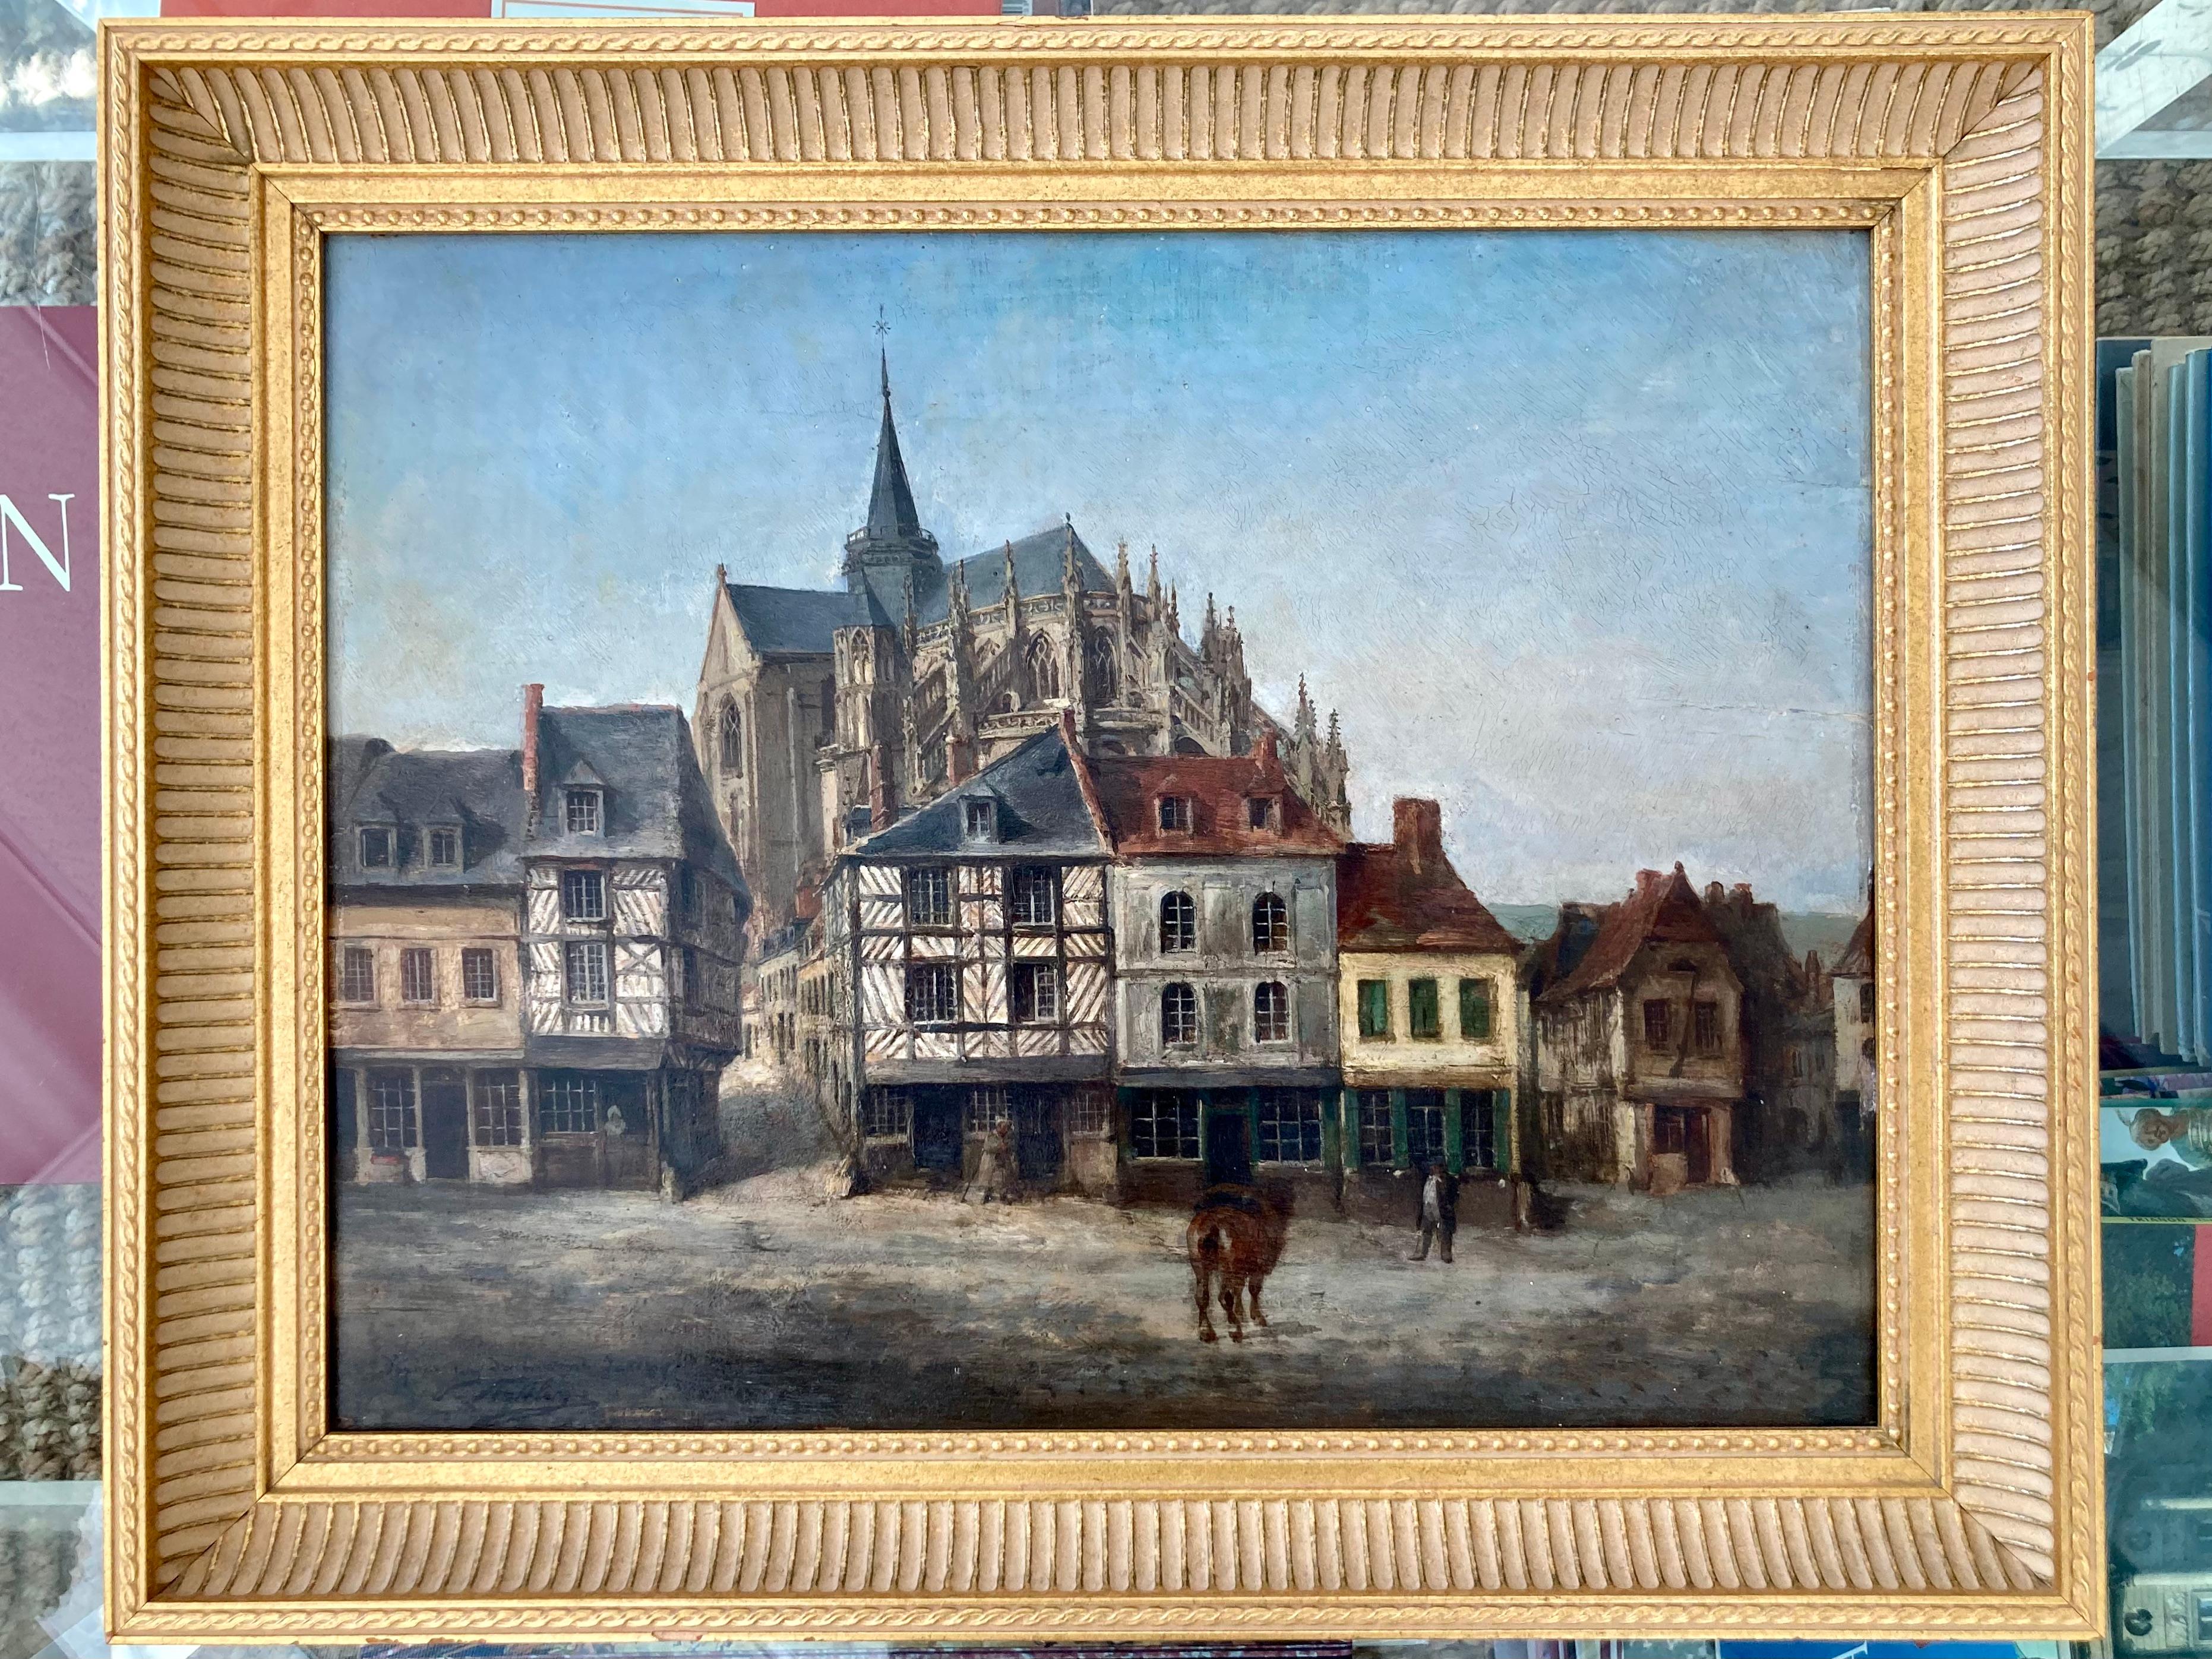 Beautiful French Normandie village painting.

Sight dimensions: 17.5